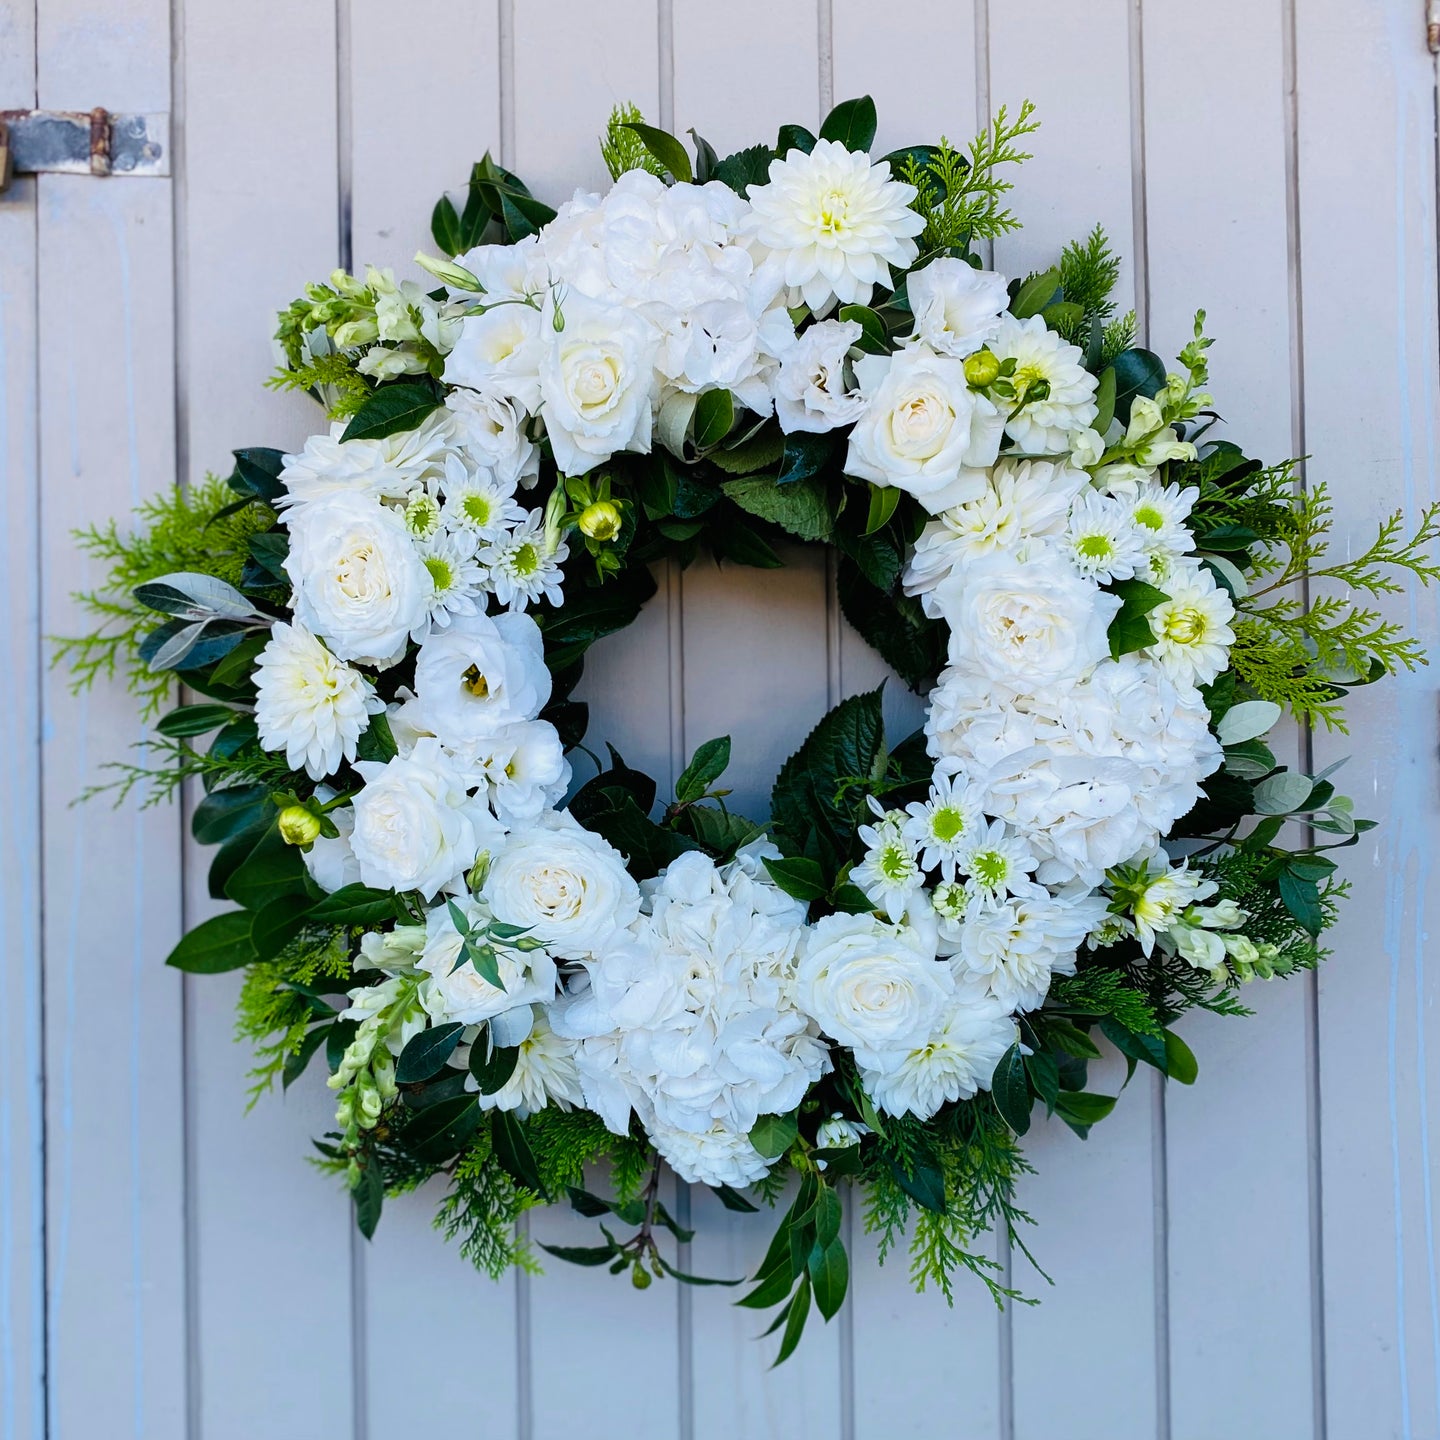 Wreath of fresh beautiful white blooms on a collar of green foliage.